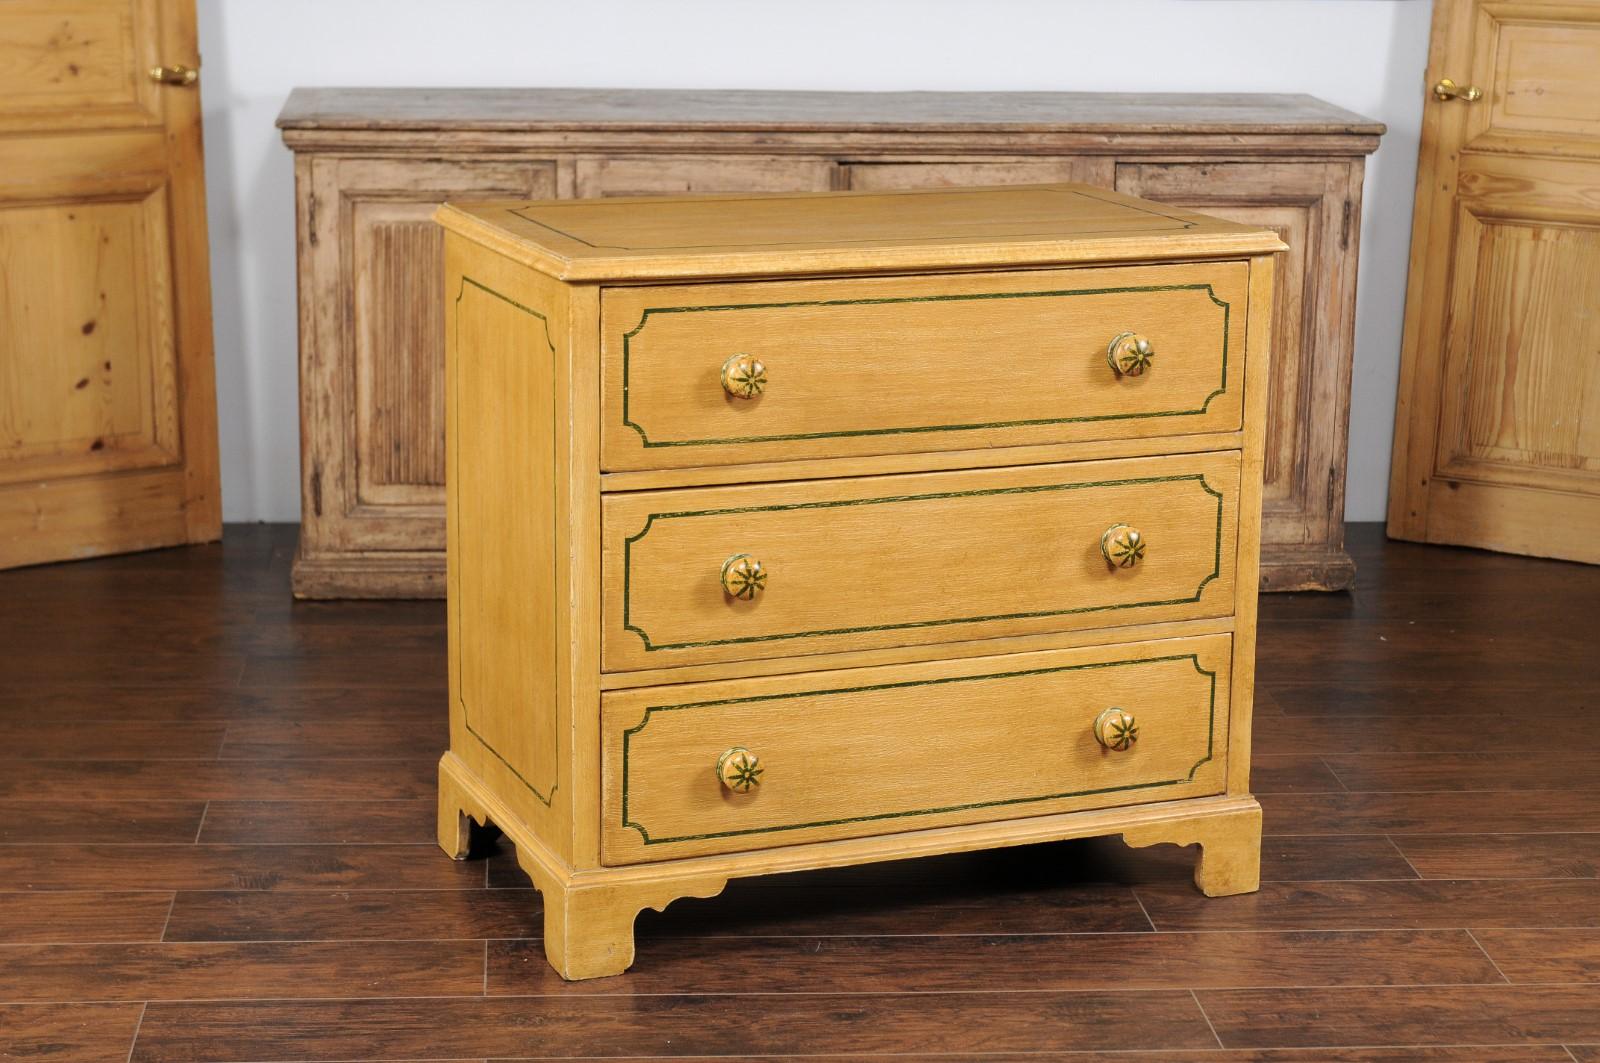 An English vintage painted three-drawer commode from the mid-20th century, with muted yellow finish and painted cartouches. This mid-20th-century English vintage commode, with its soothing muted yellow finish and delicately painted cartouches,